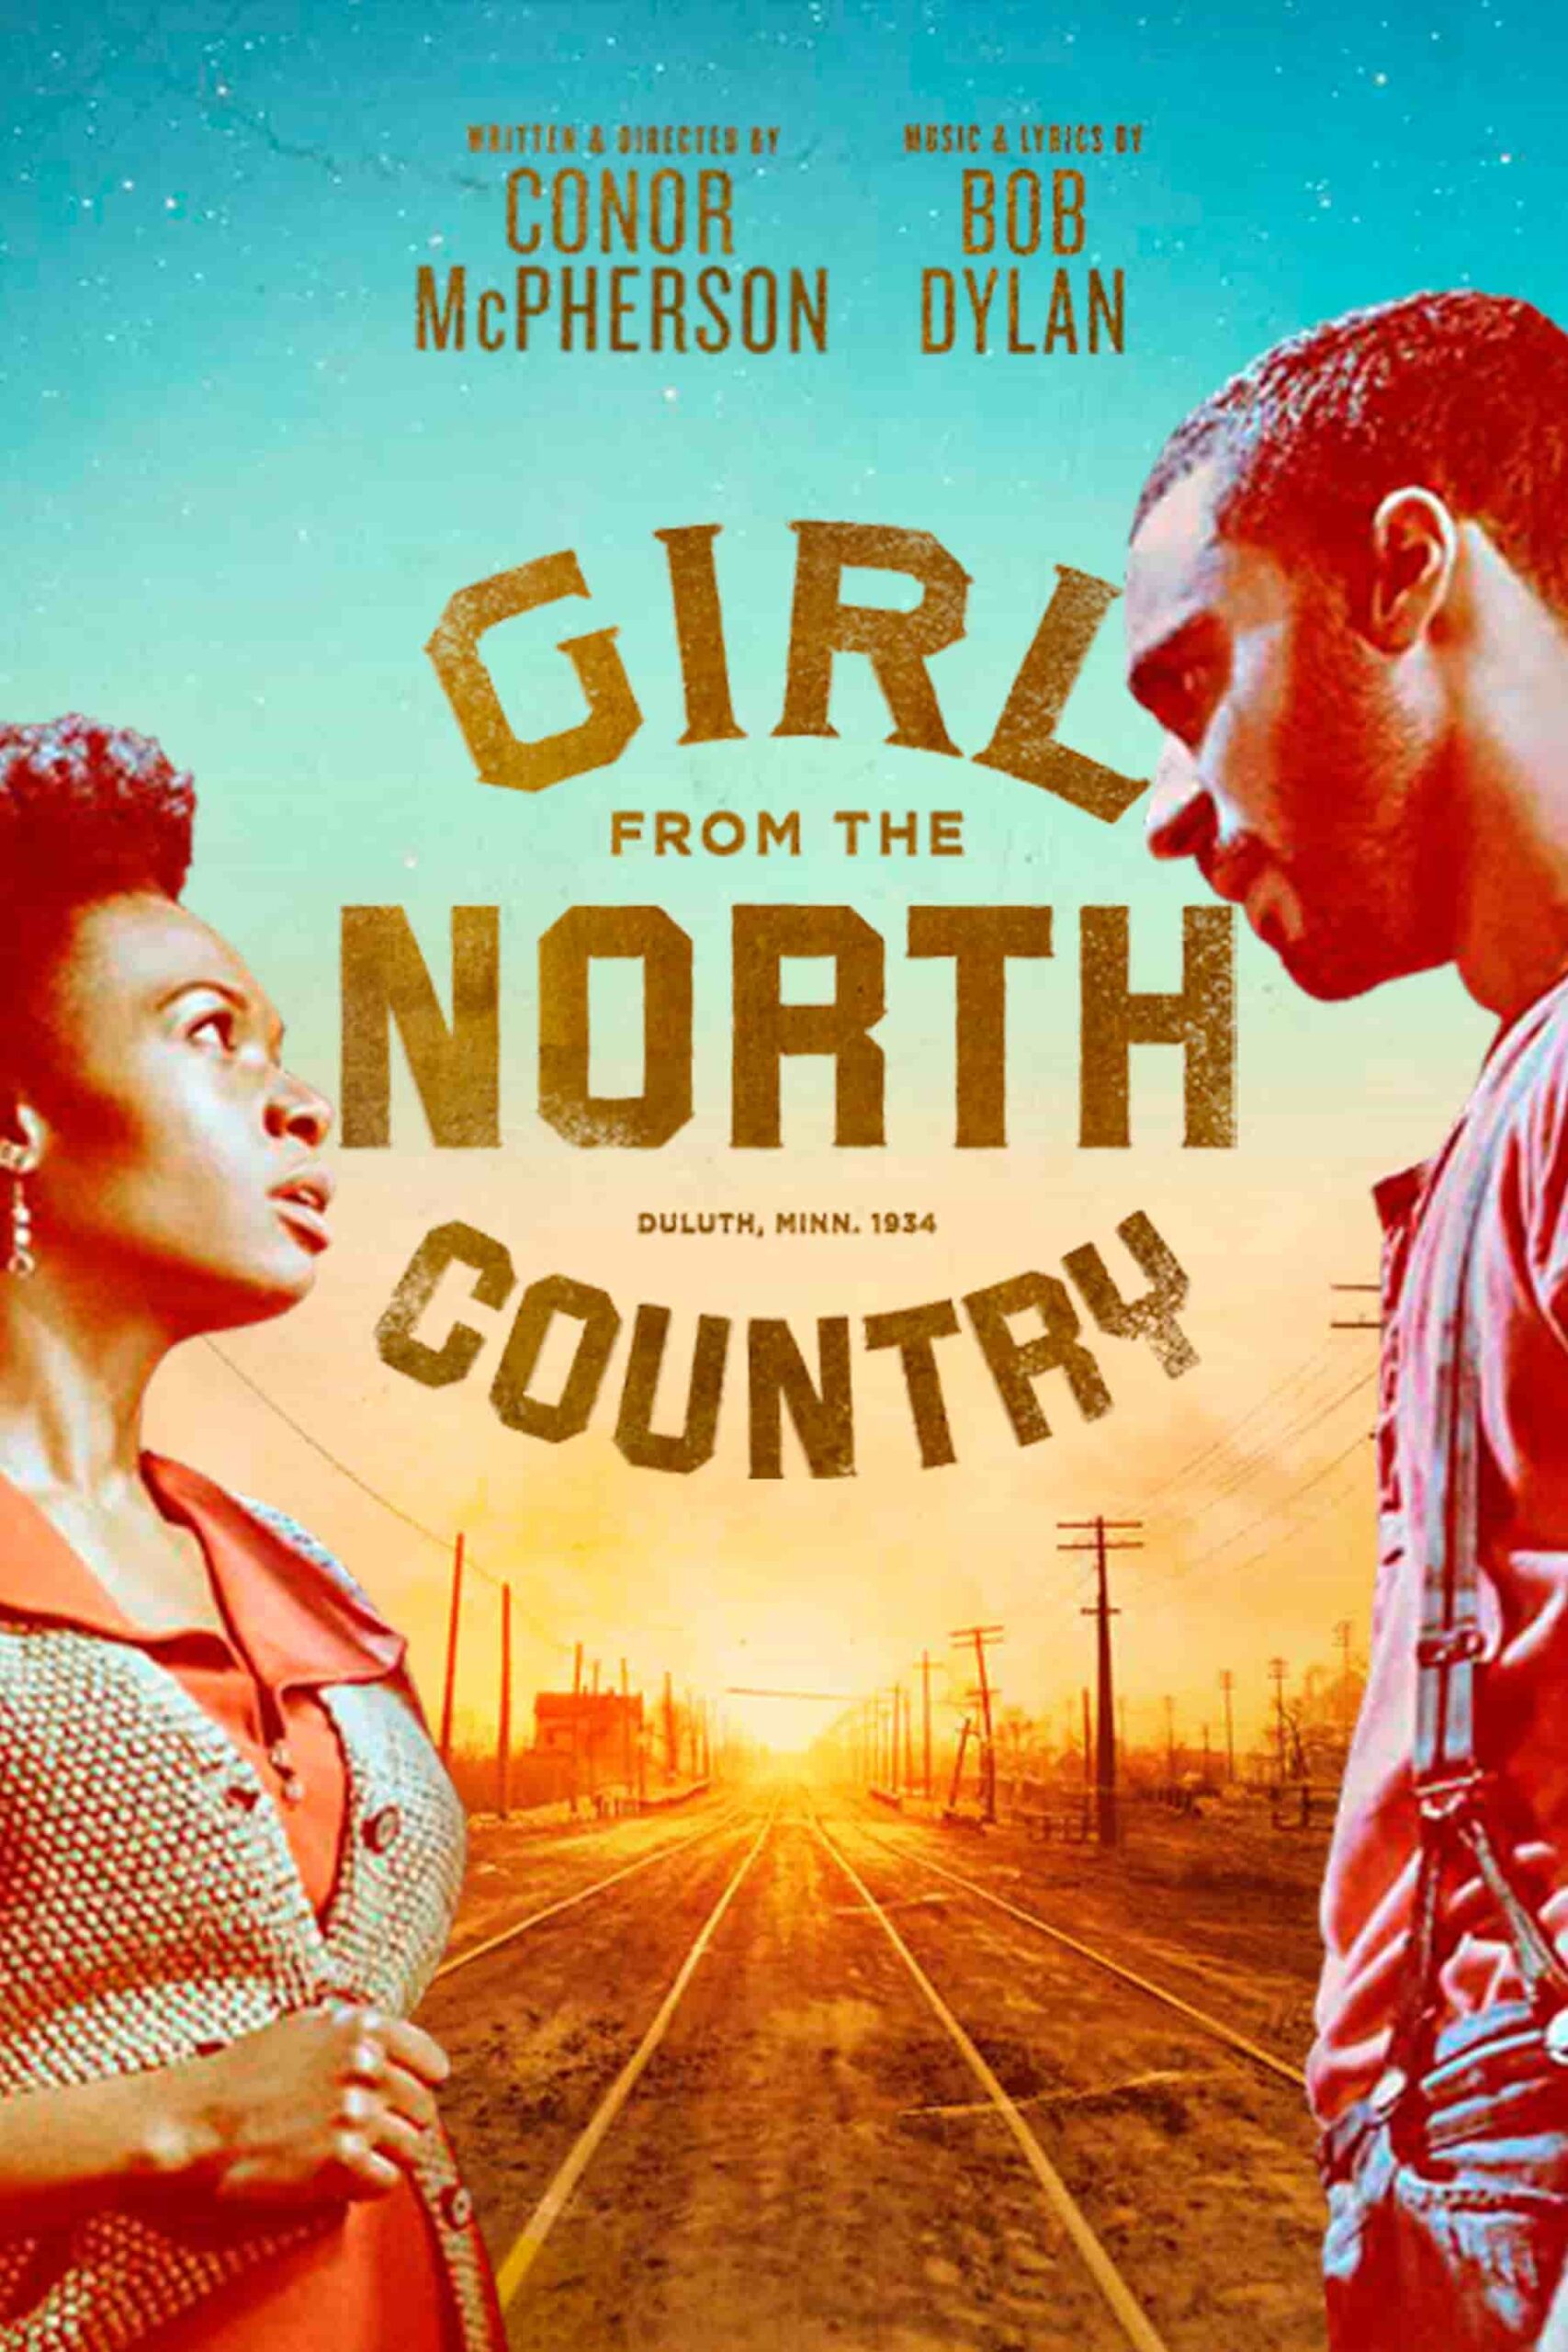 Male and female lead gaze at each other across the show title treatment, set against a sunset over train tracks.